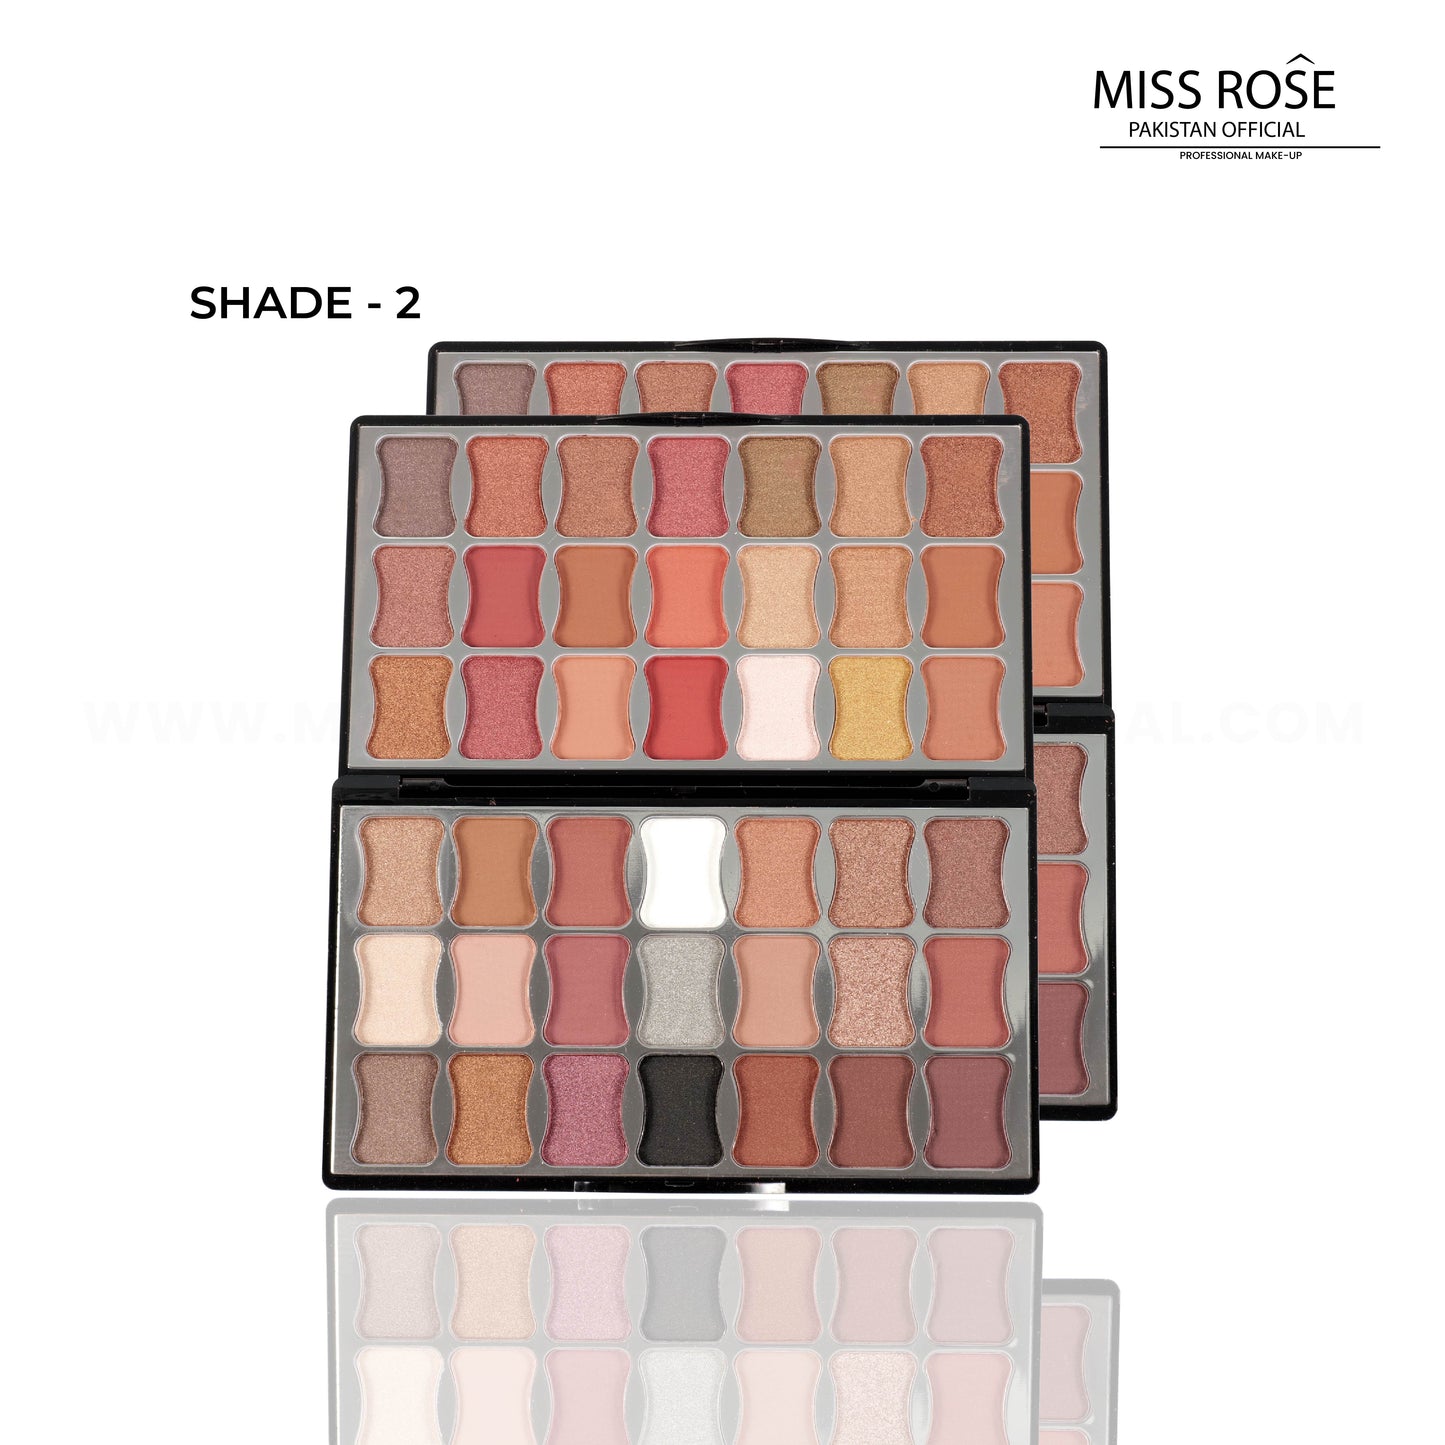 Double Shade Eyeshadow Palette